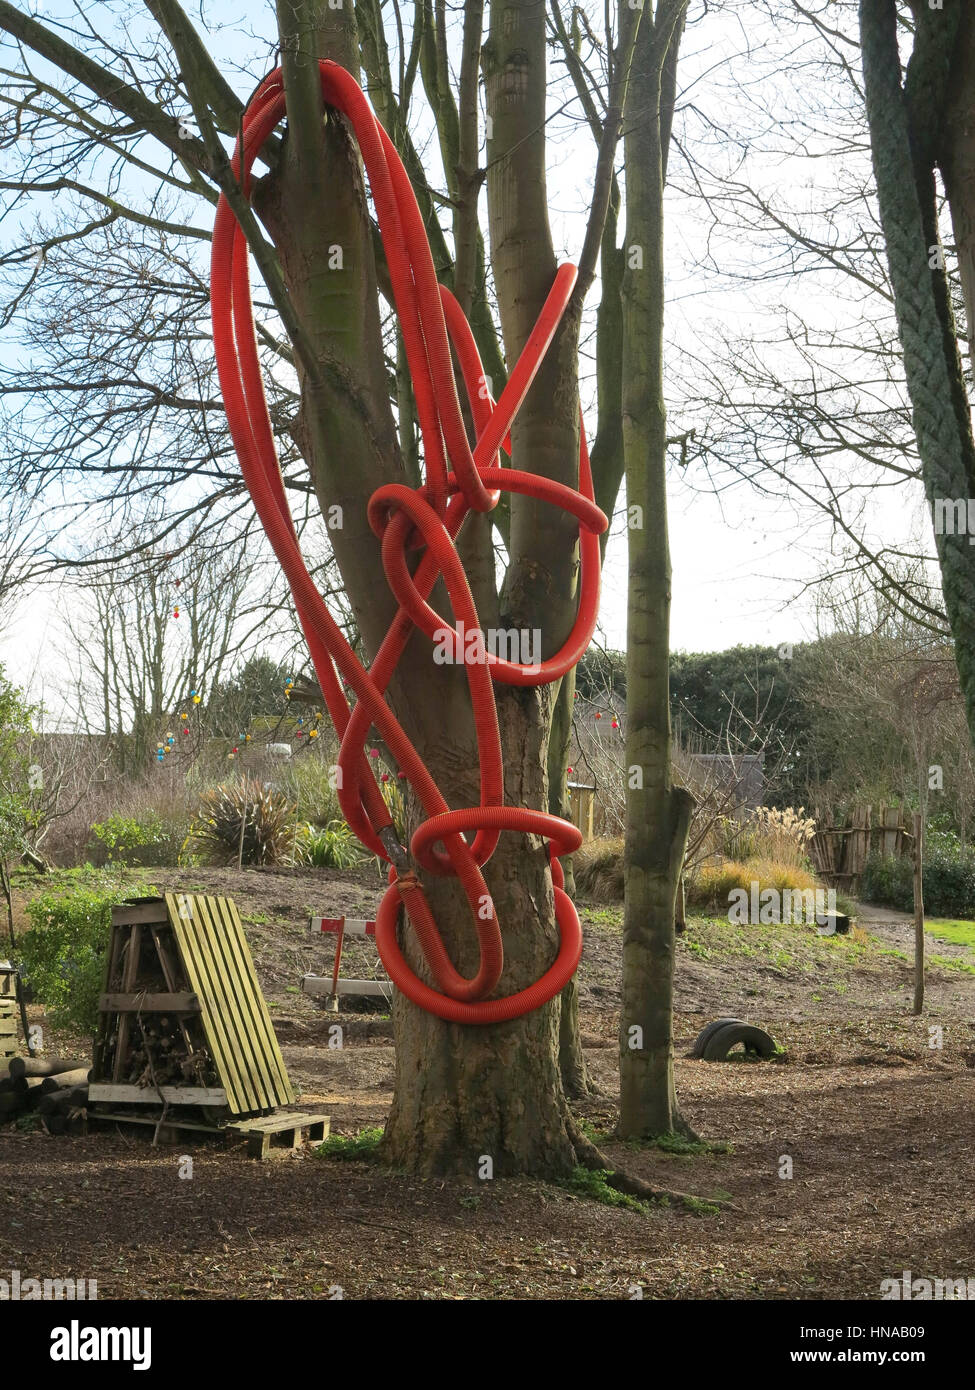 Red plastic tubing used as a climbing frame in school garden or playground Stock Photo